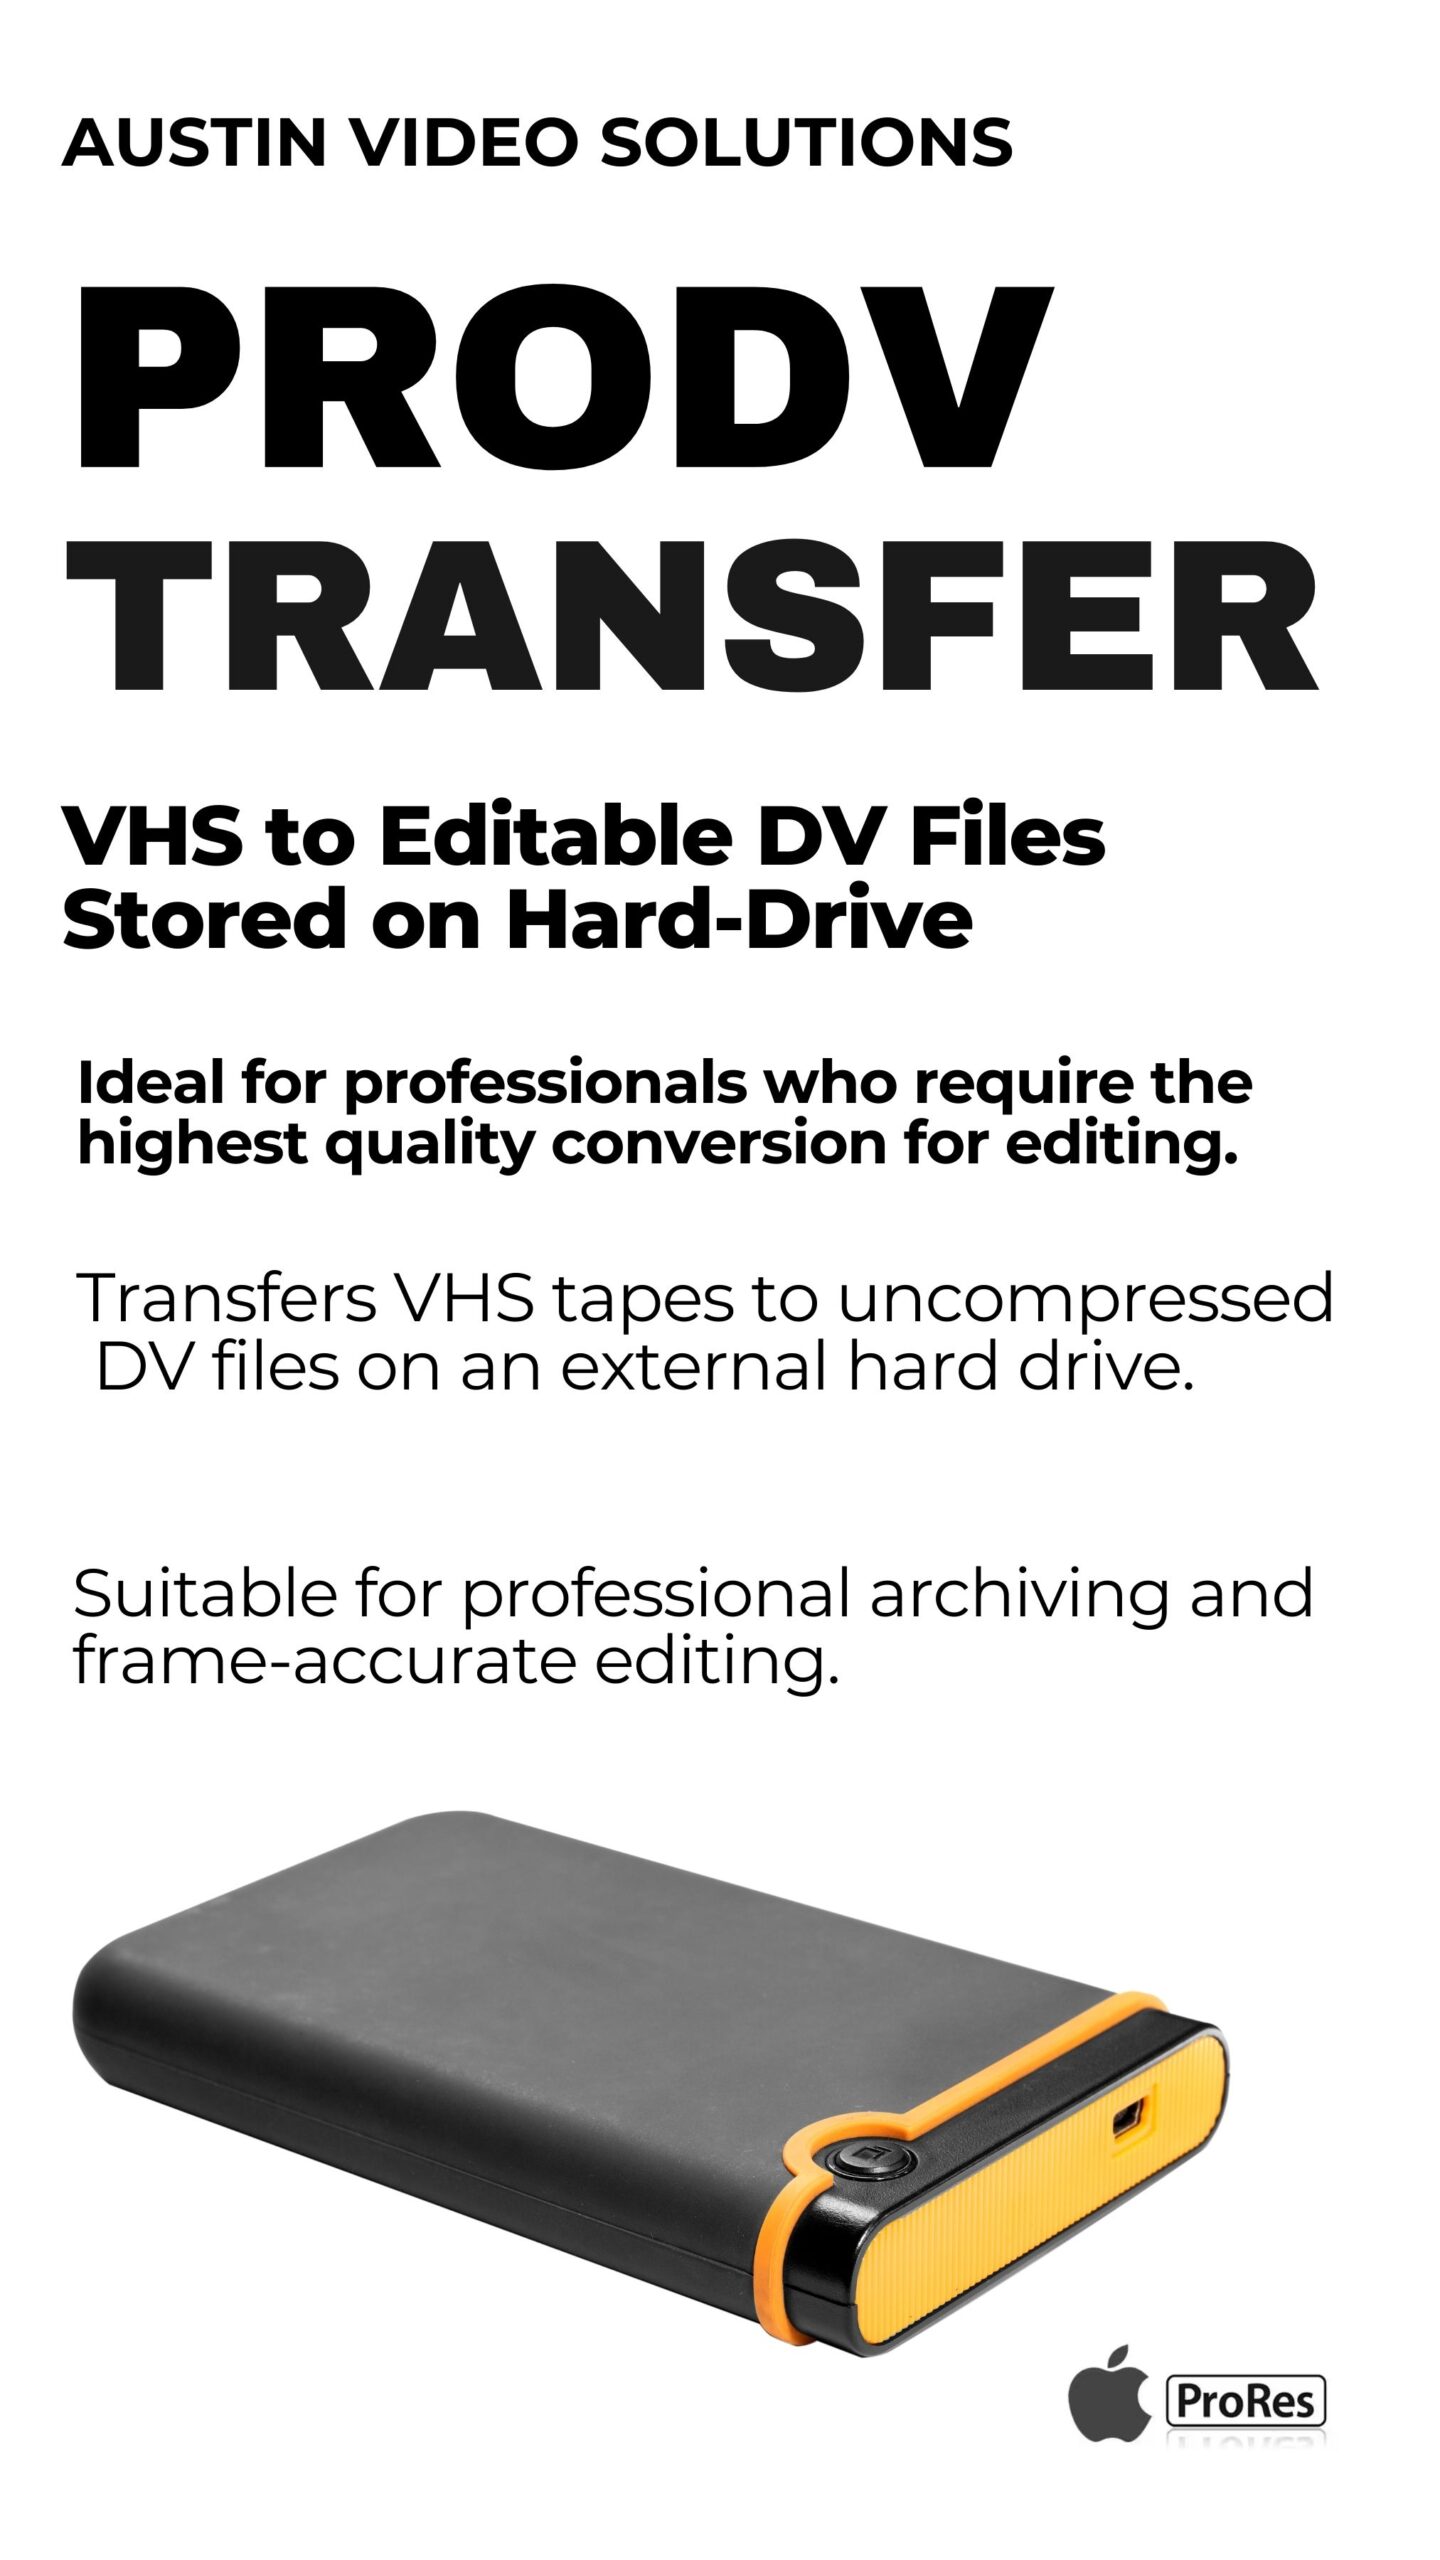 ProDV Conversions Convert. your vhs to uncompressed DV files with Austin Video Solutions